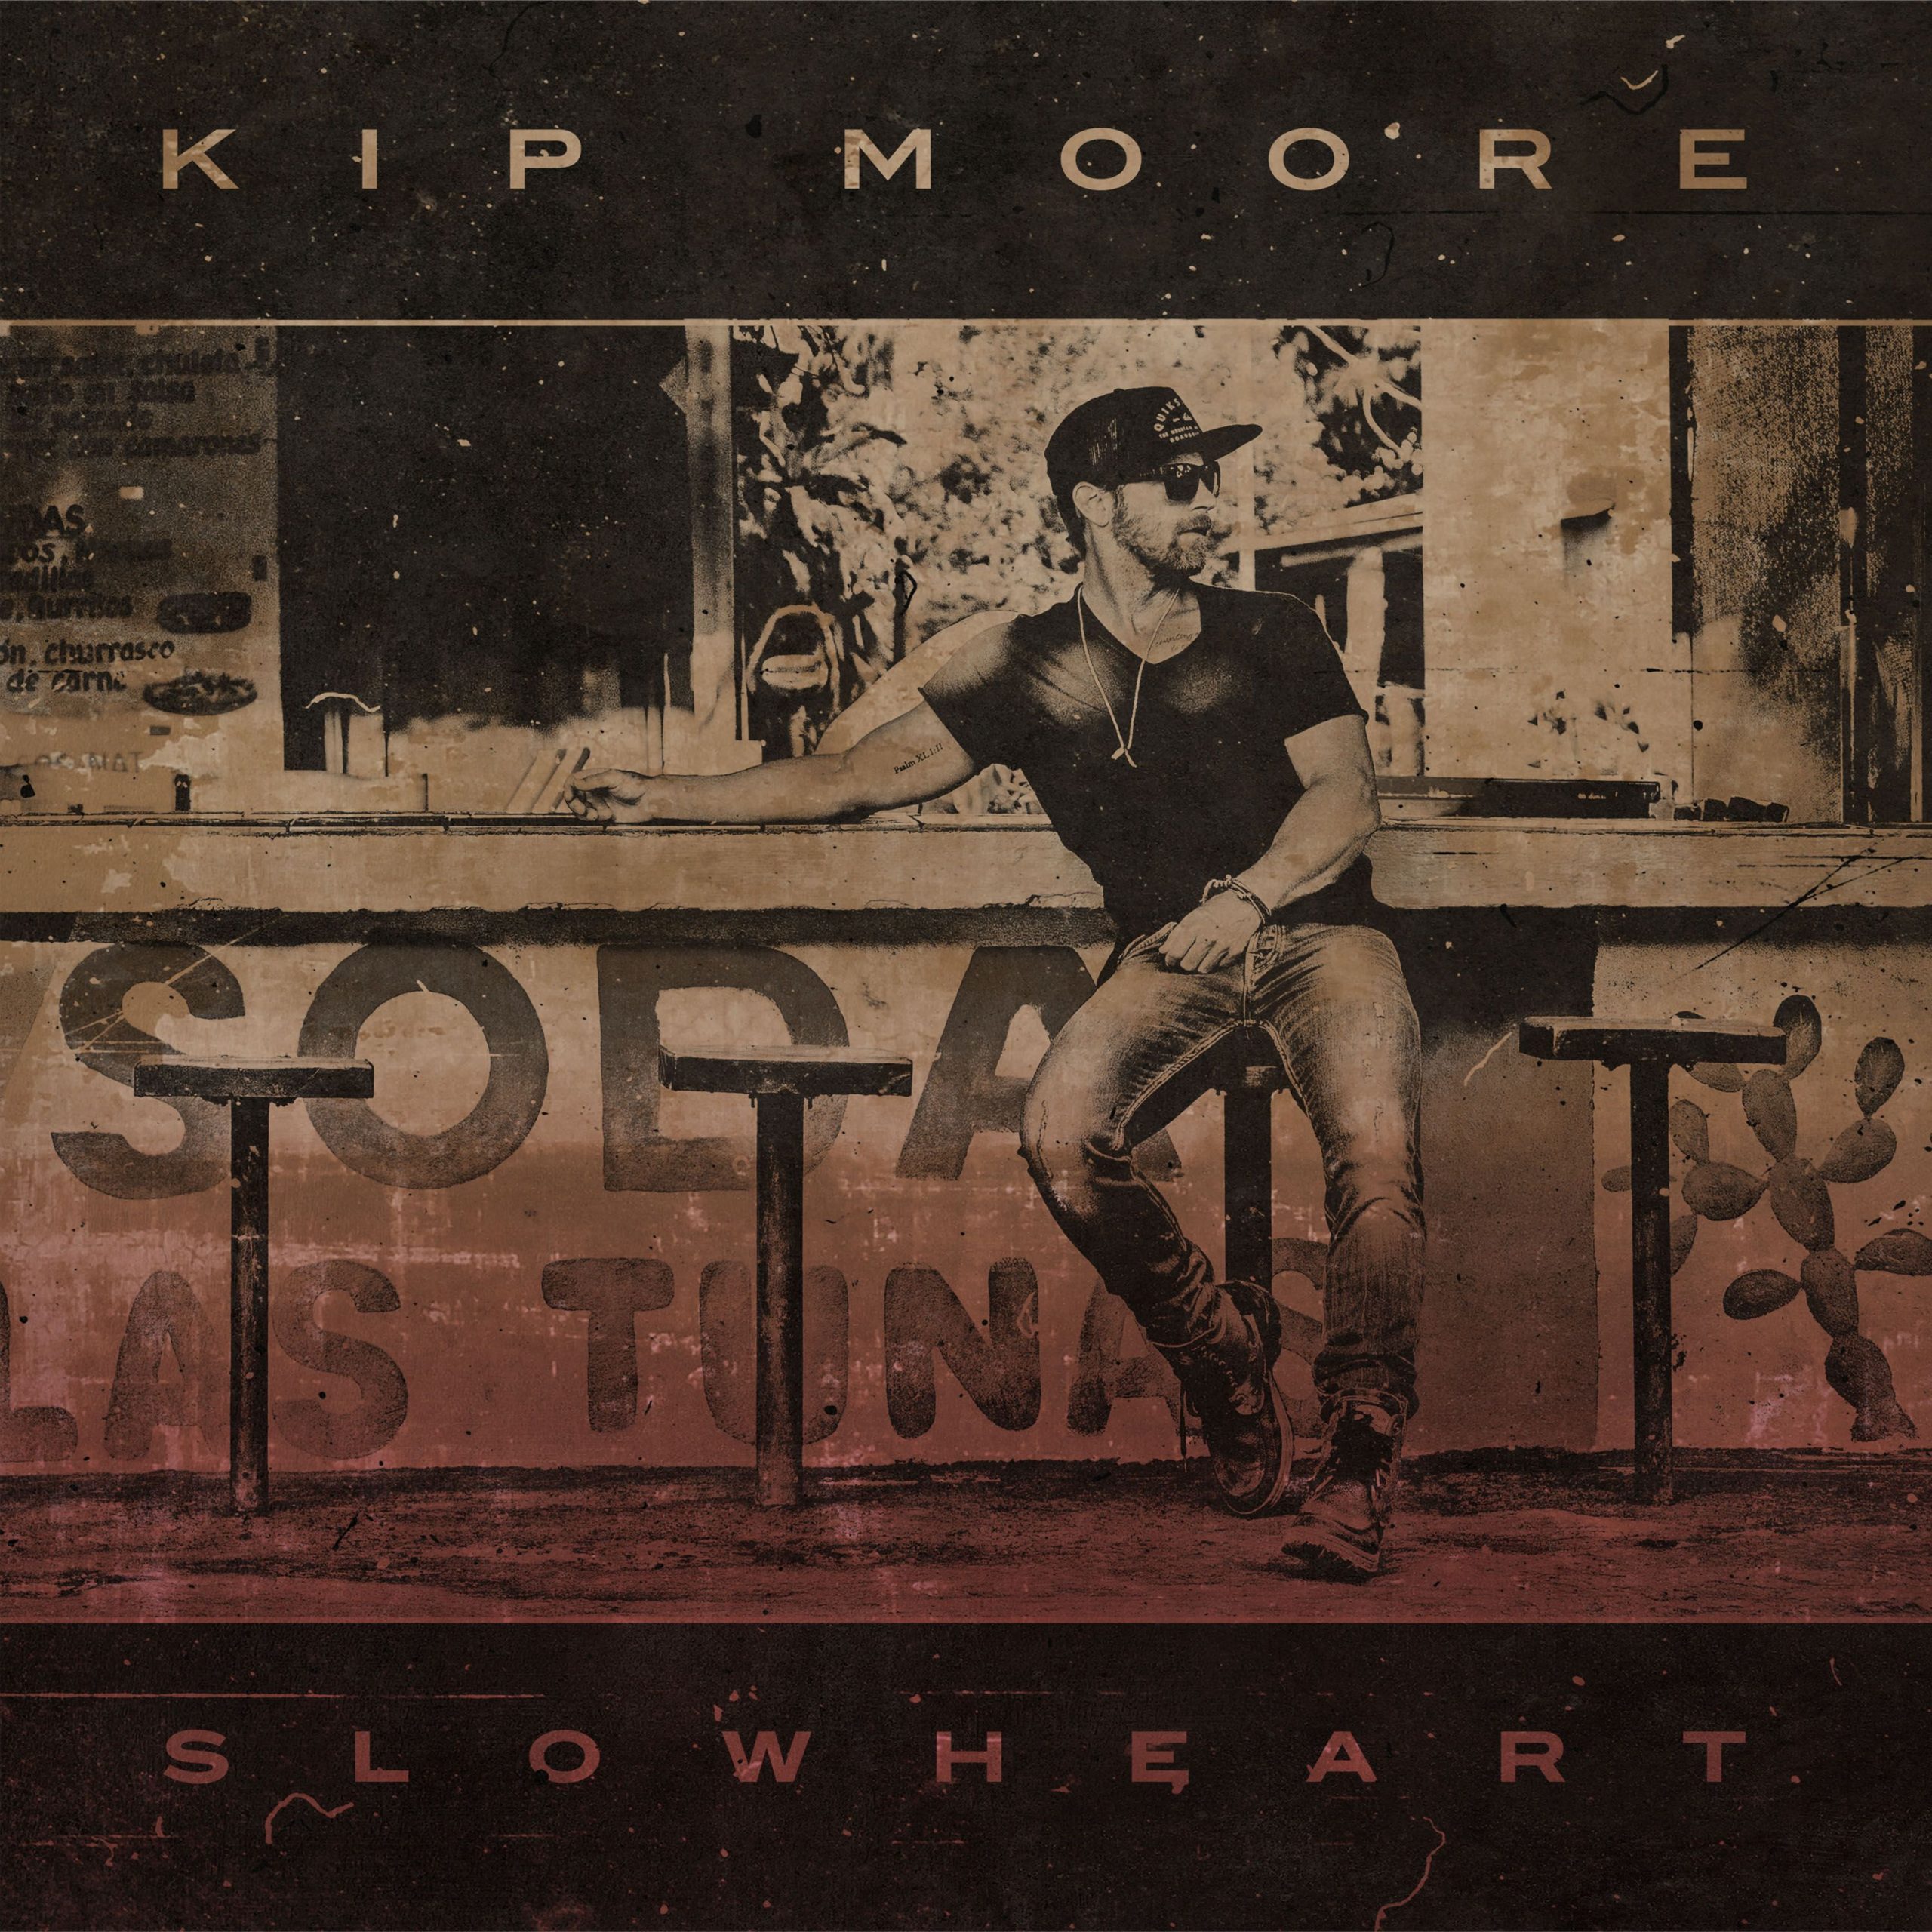 KIP MOORE’S “THOROUGHLY VITAL” SLOWHEART SPOTLIGHTED BY NPR’S “FIRST LISTEN” – AVAILABLE TO STREAM TODAY